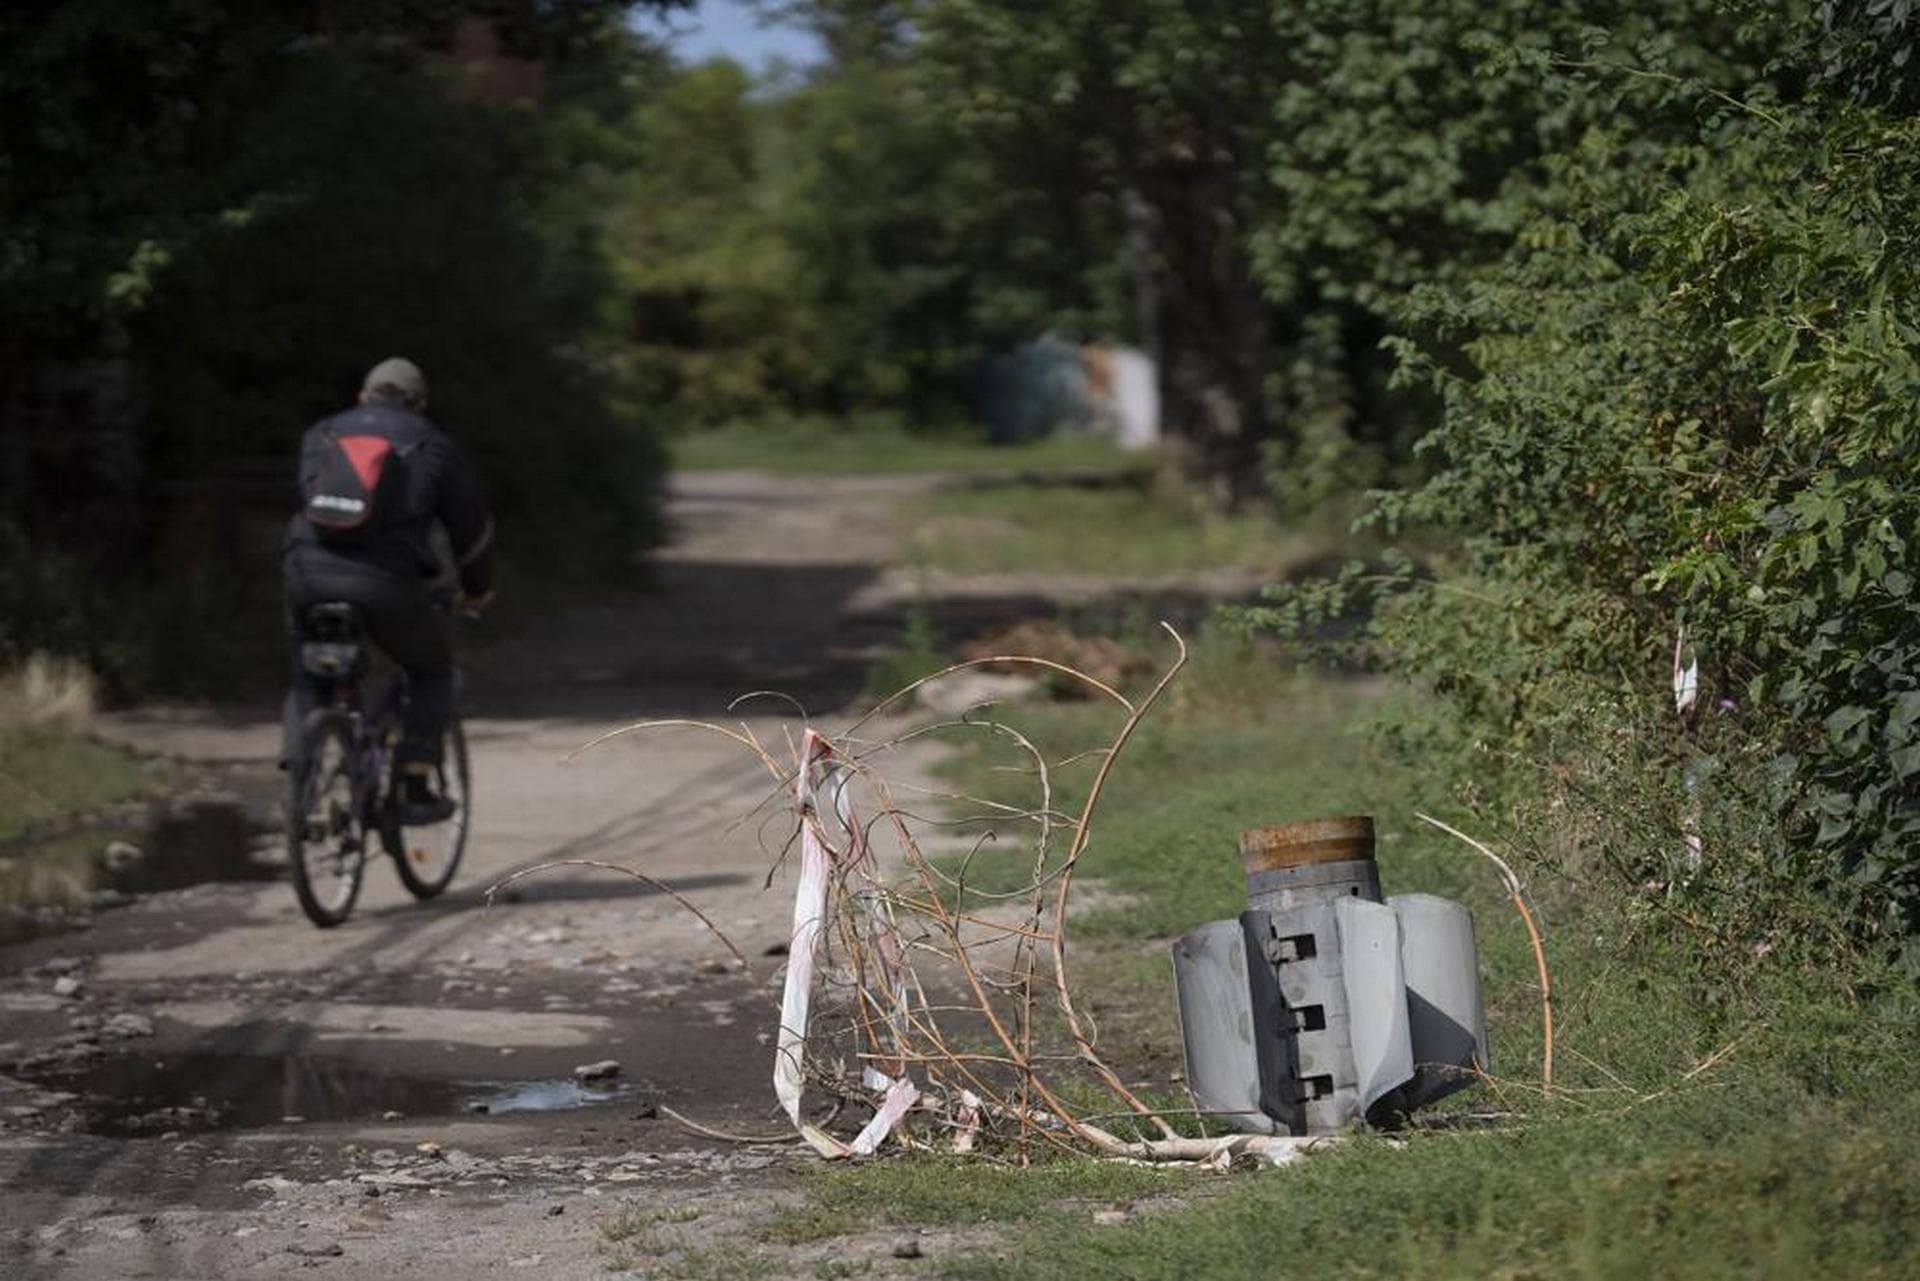 A man cycles past part of a rocket that sits wedged in the ground at a residential area in Sloviansk